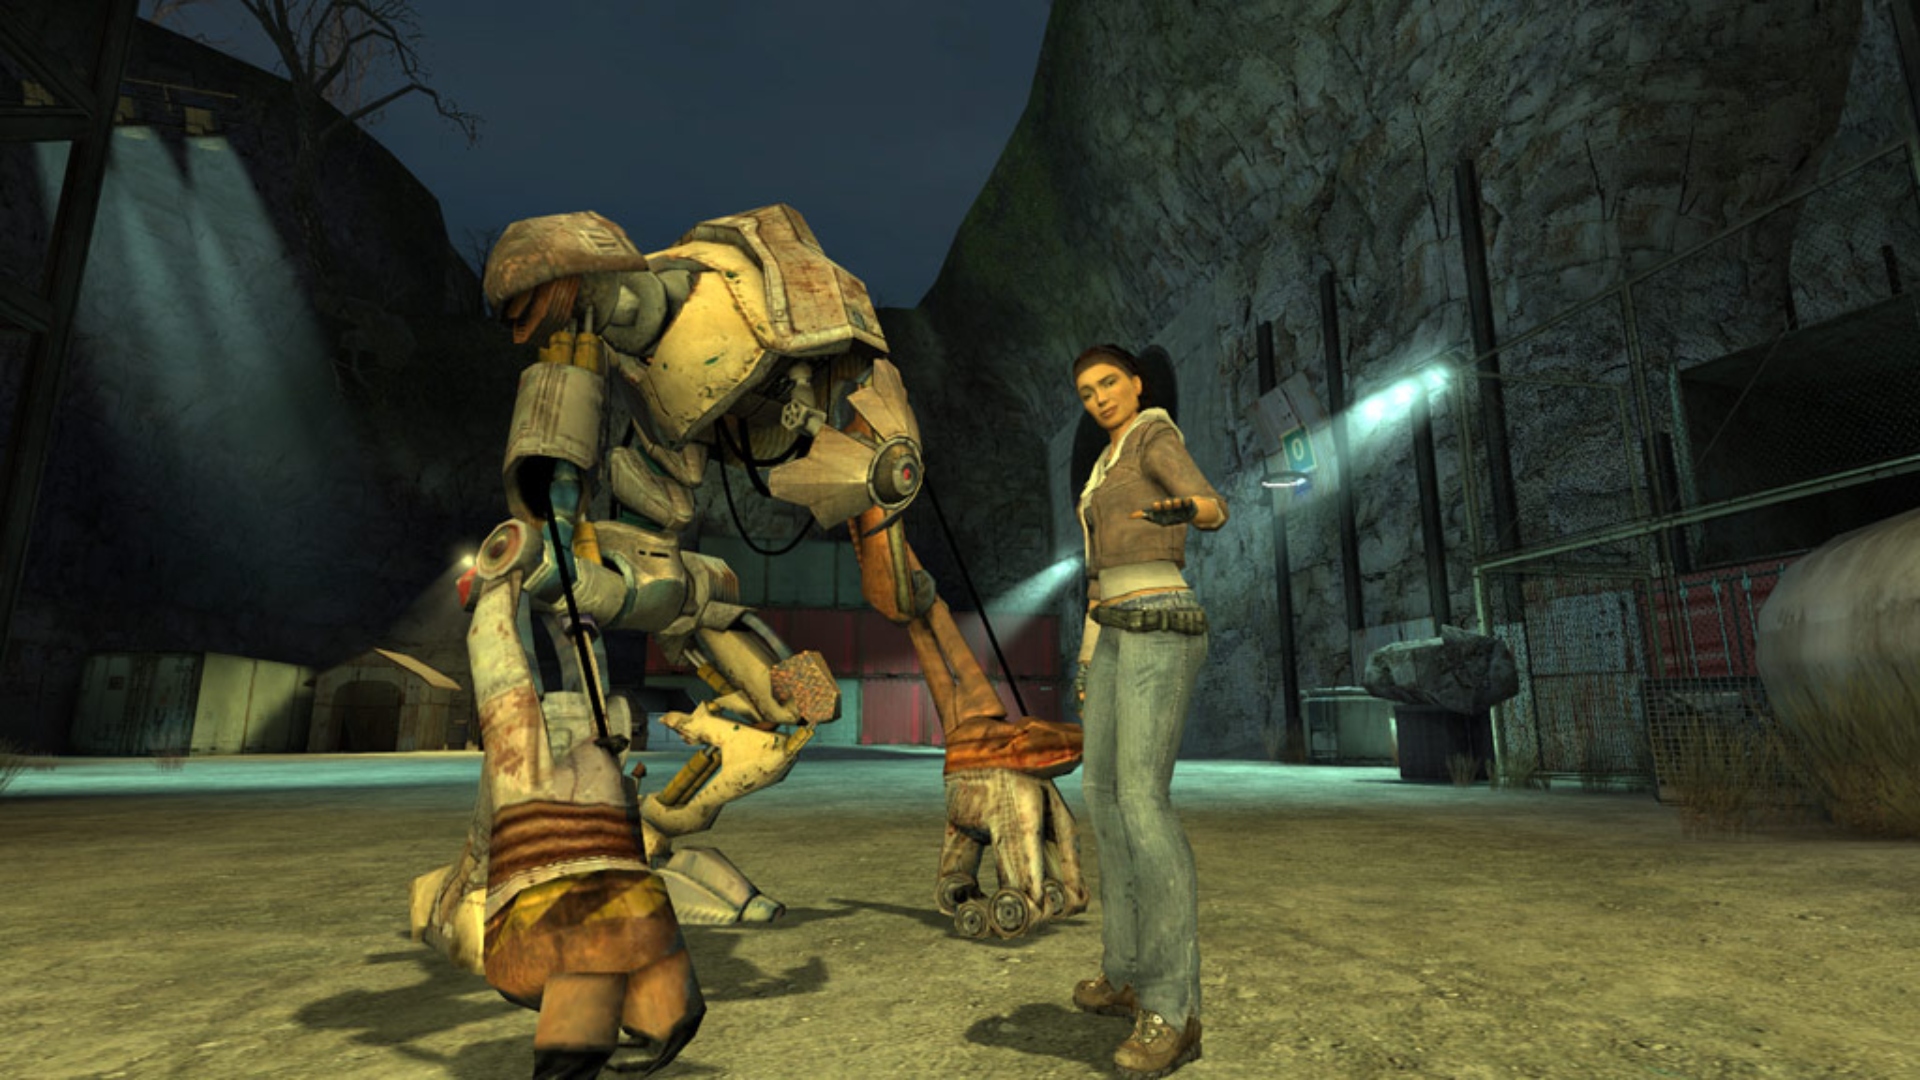 Half-Life novel: A young woman, Alyx Vance, stands alongside a giant robot in Valve FPS game Half-Life 2